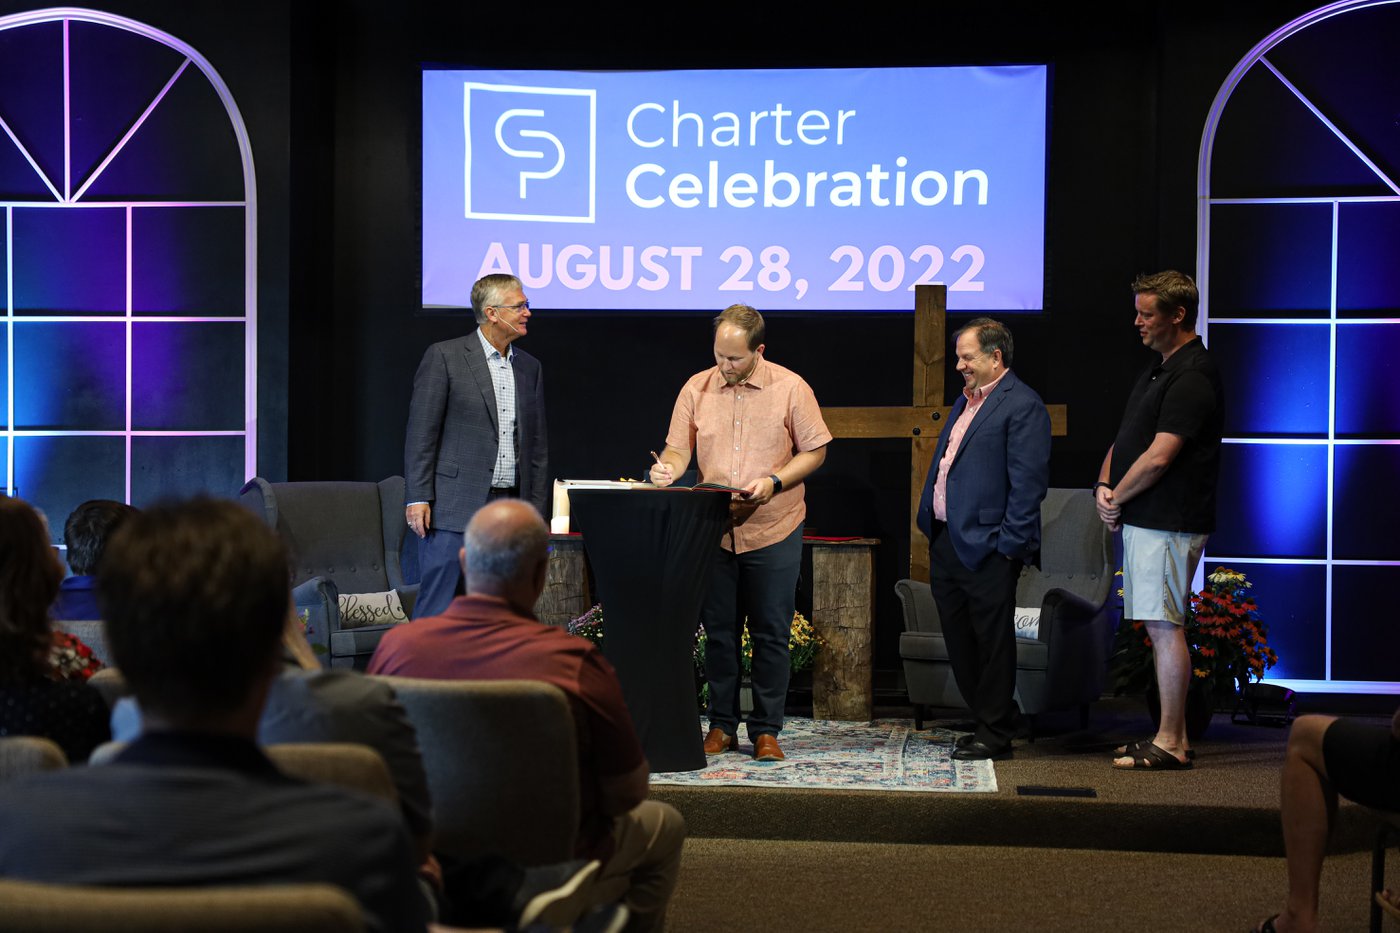 Signing the church charter at the Crosspoint's Charter Celebration service.